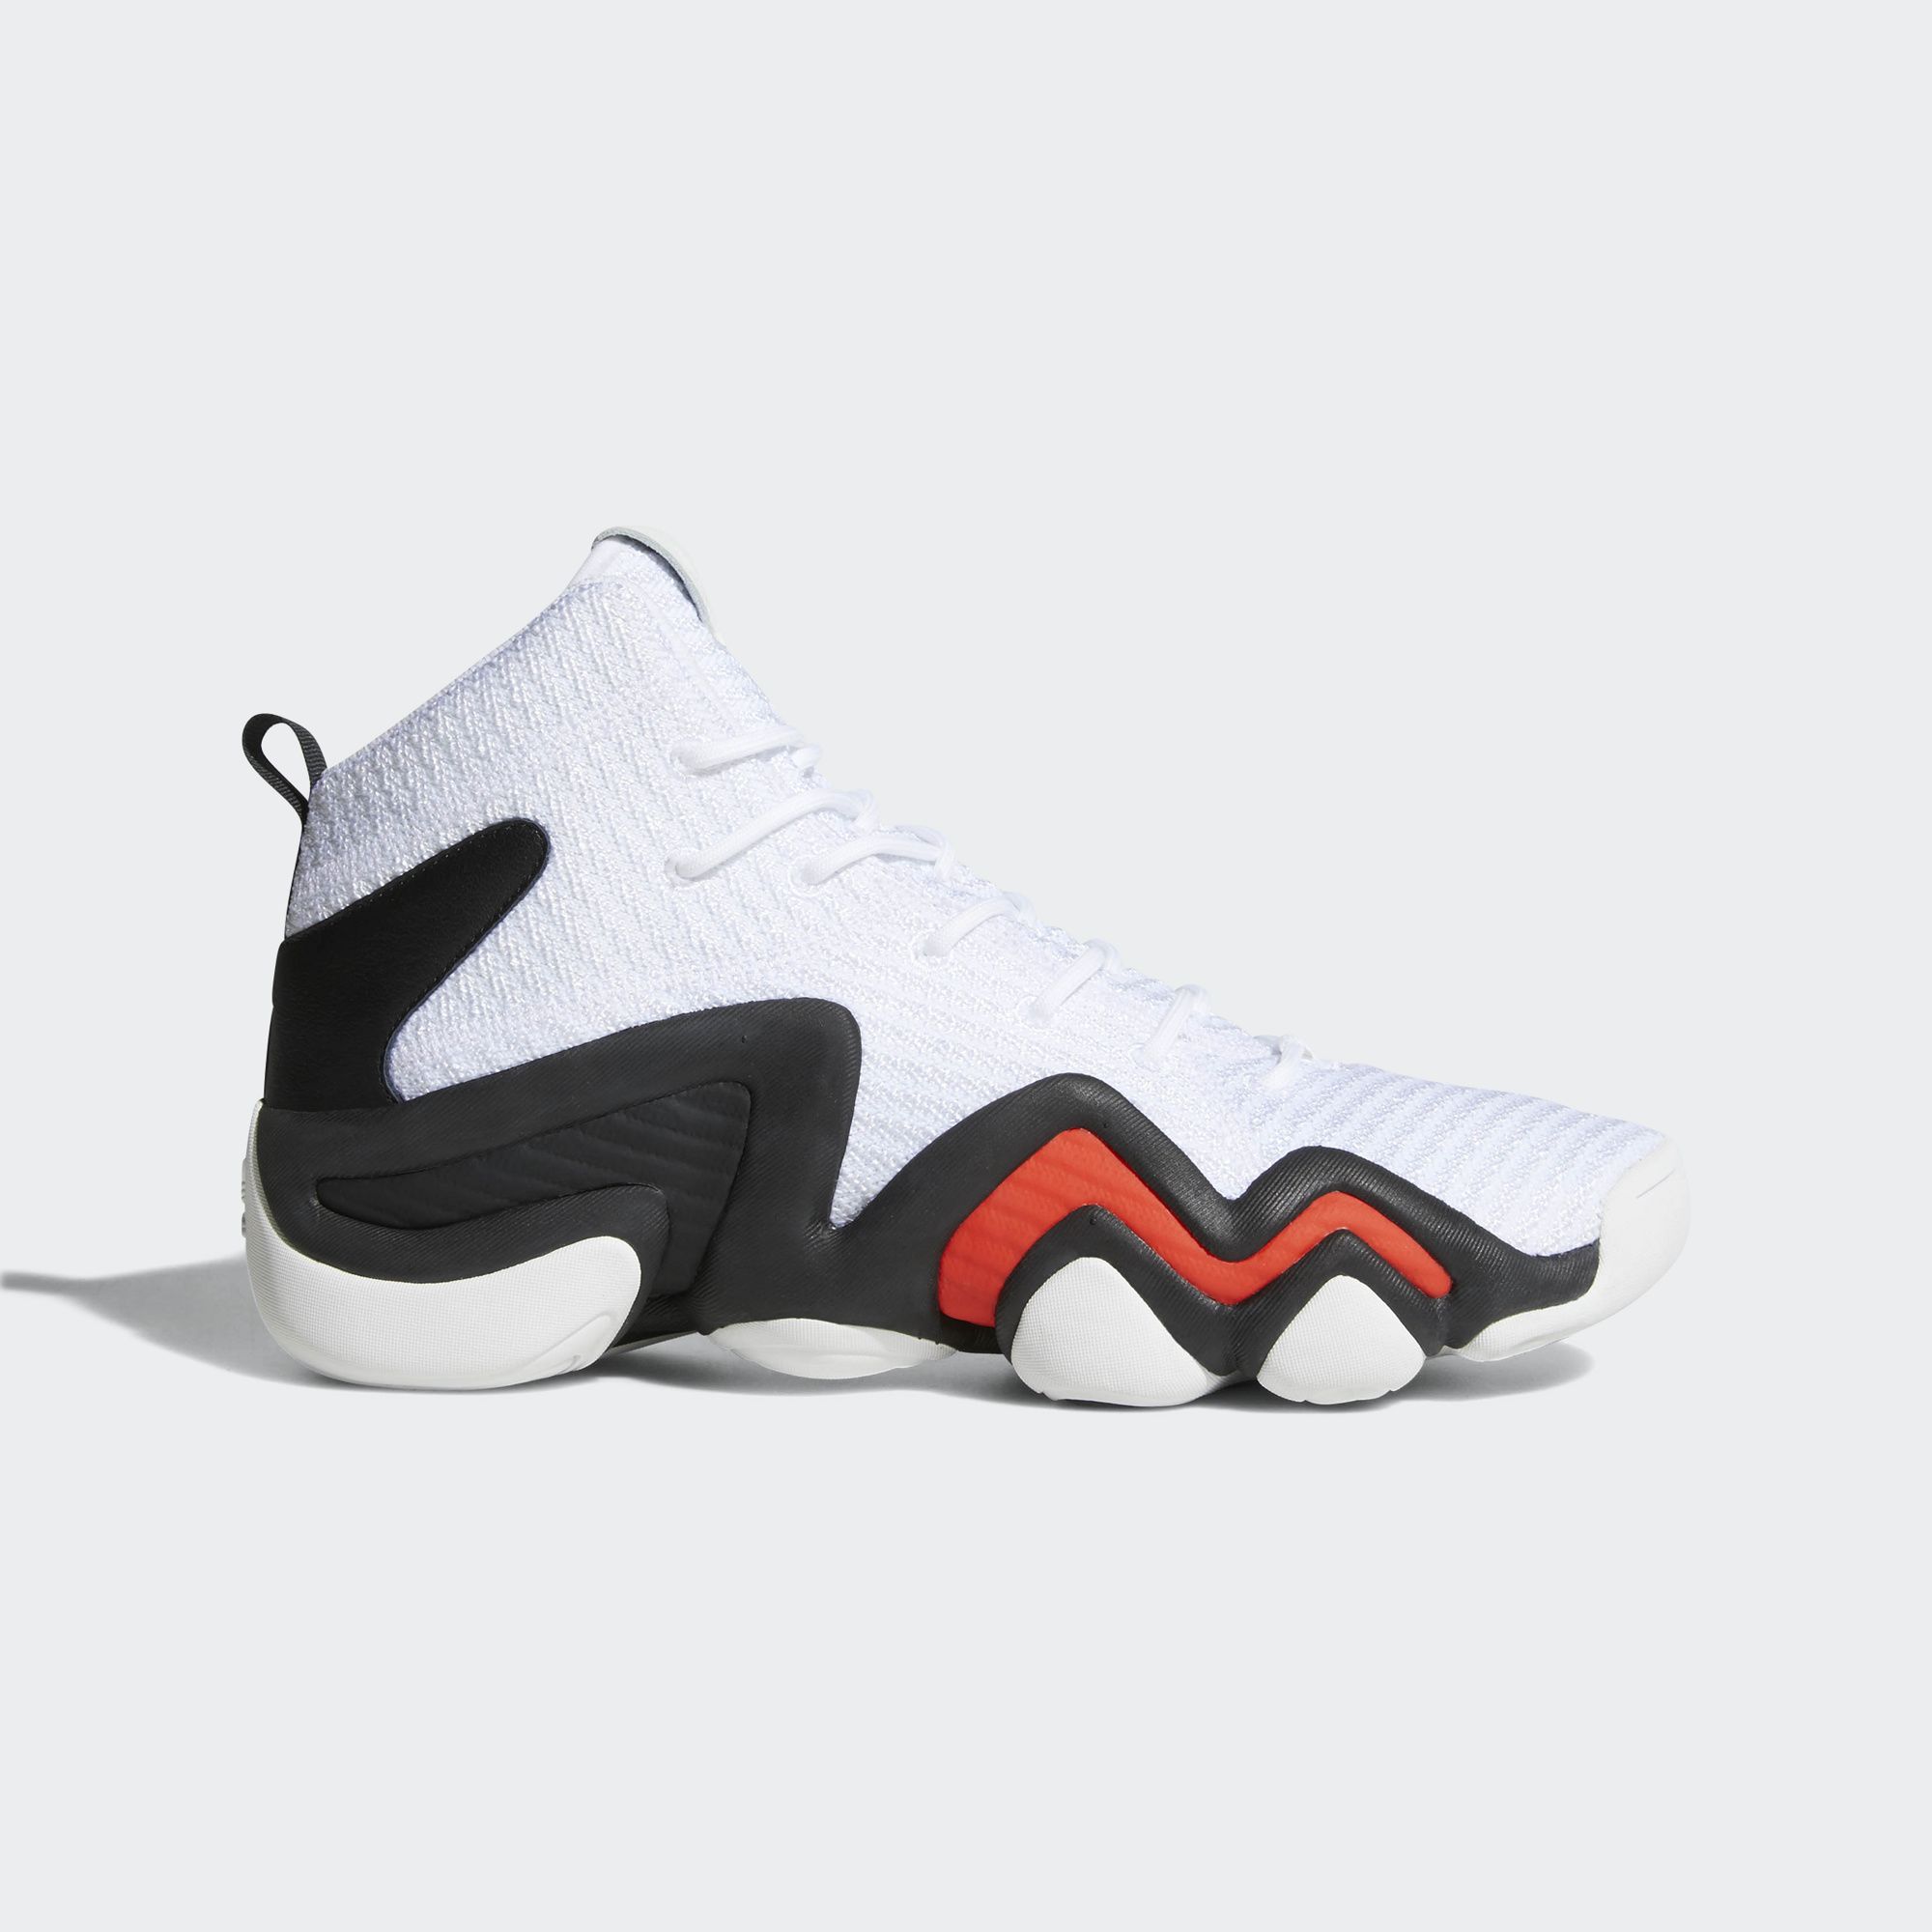 Adidas Crazy 8 Adv Primeknit Performance Review On Sale, UP TO 53% OFF